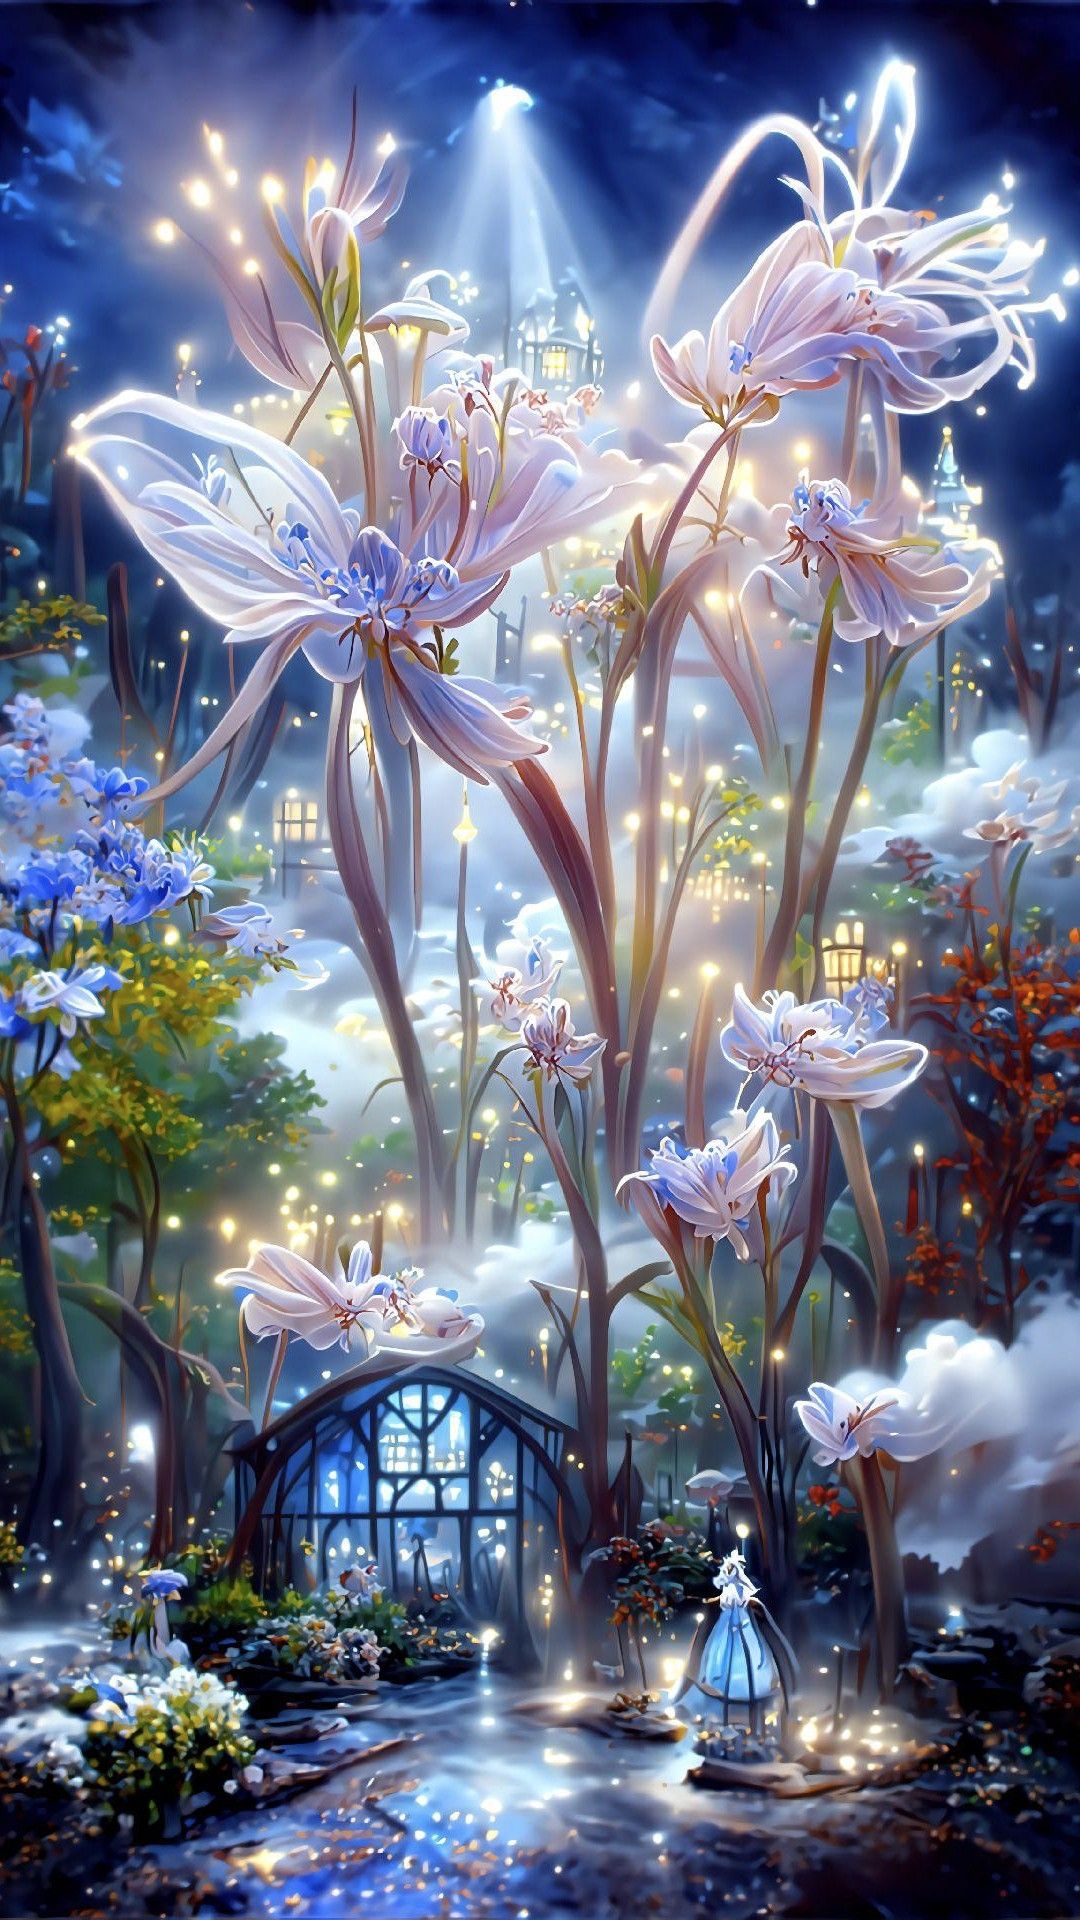 HD Beautiful fairy images